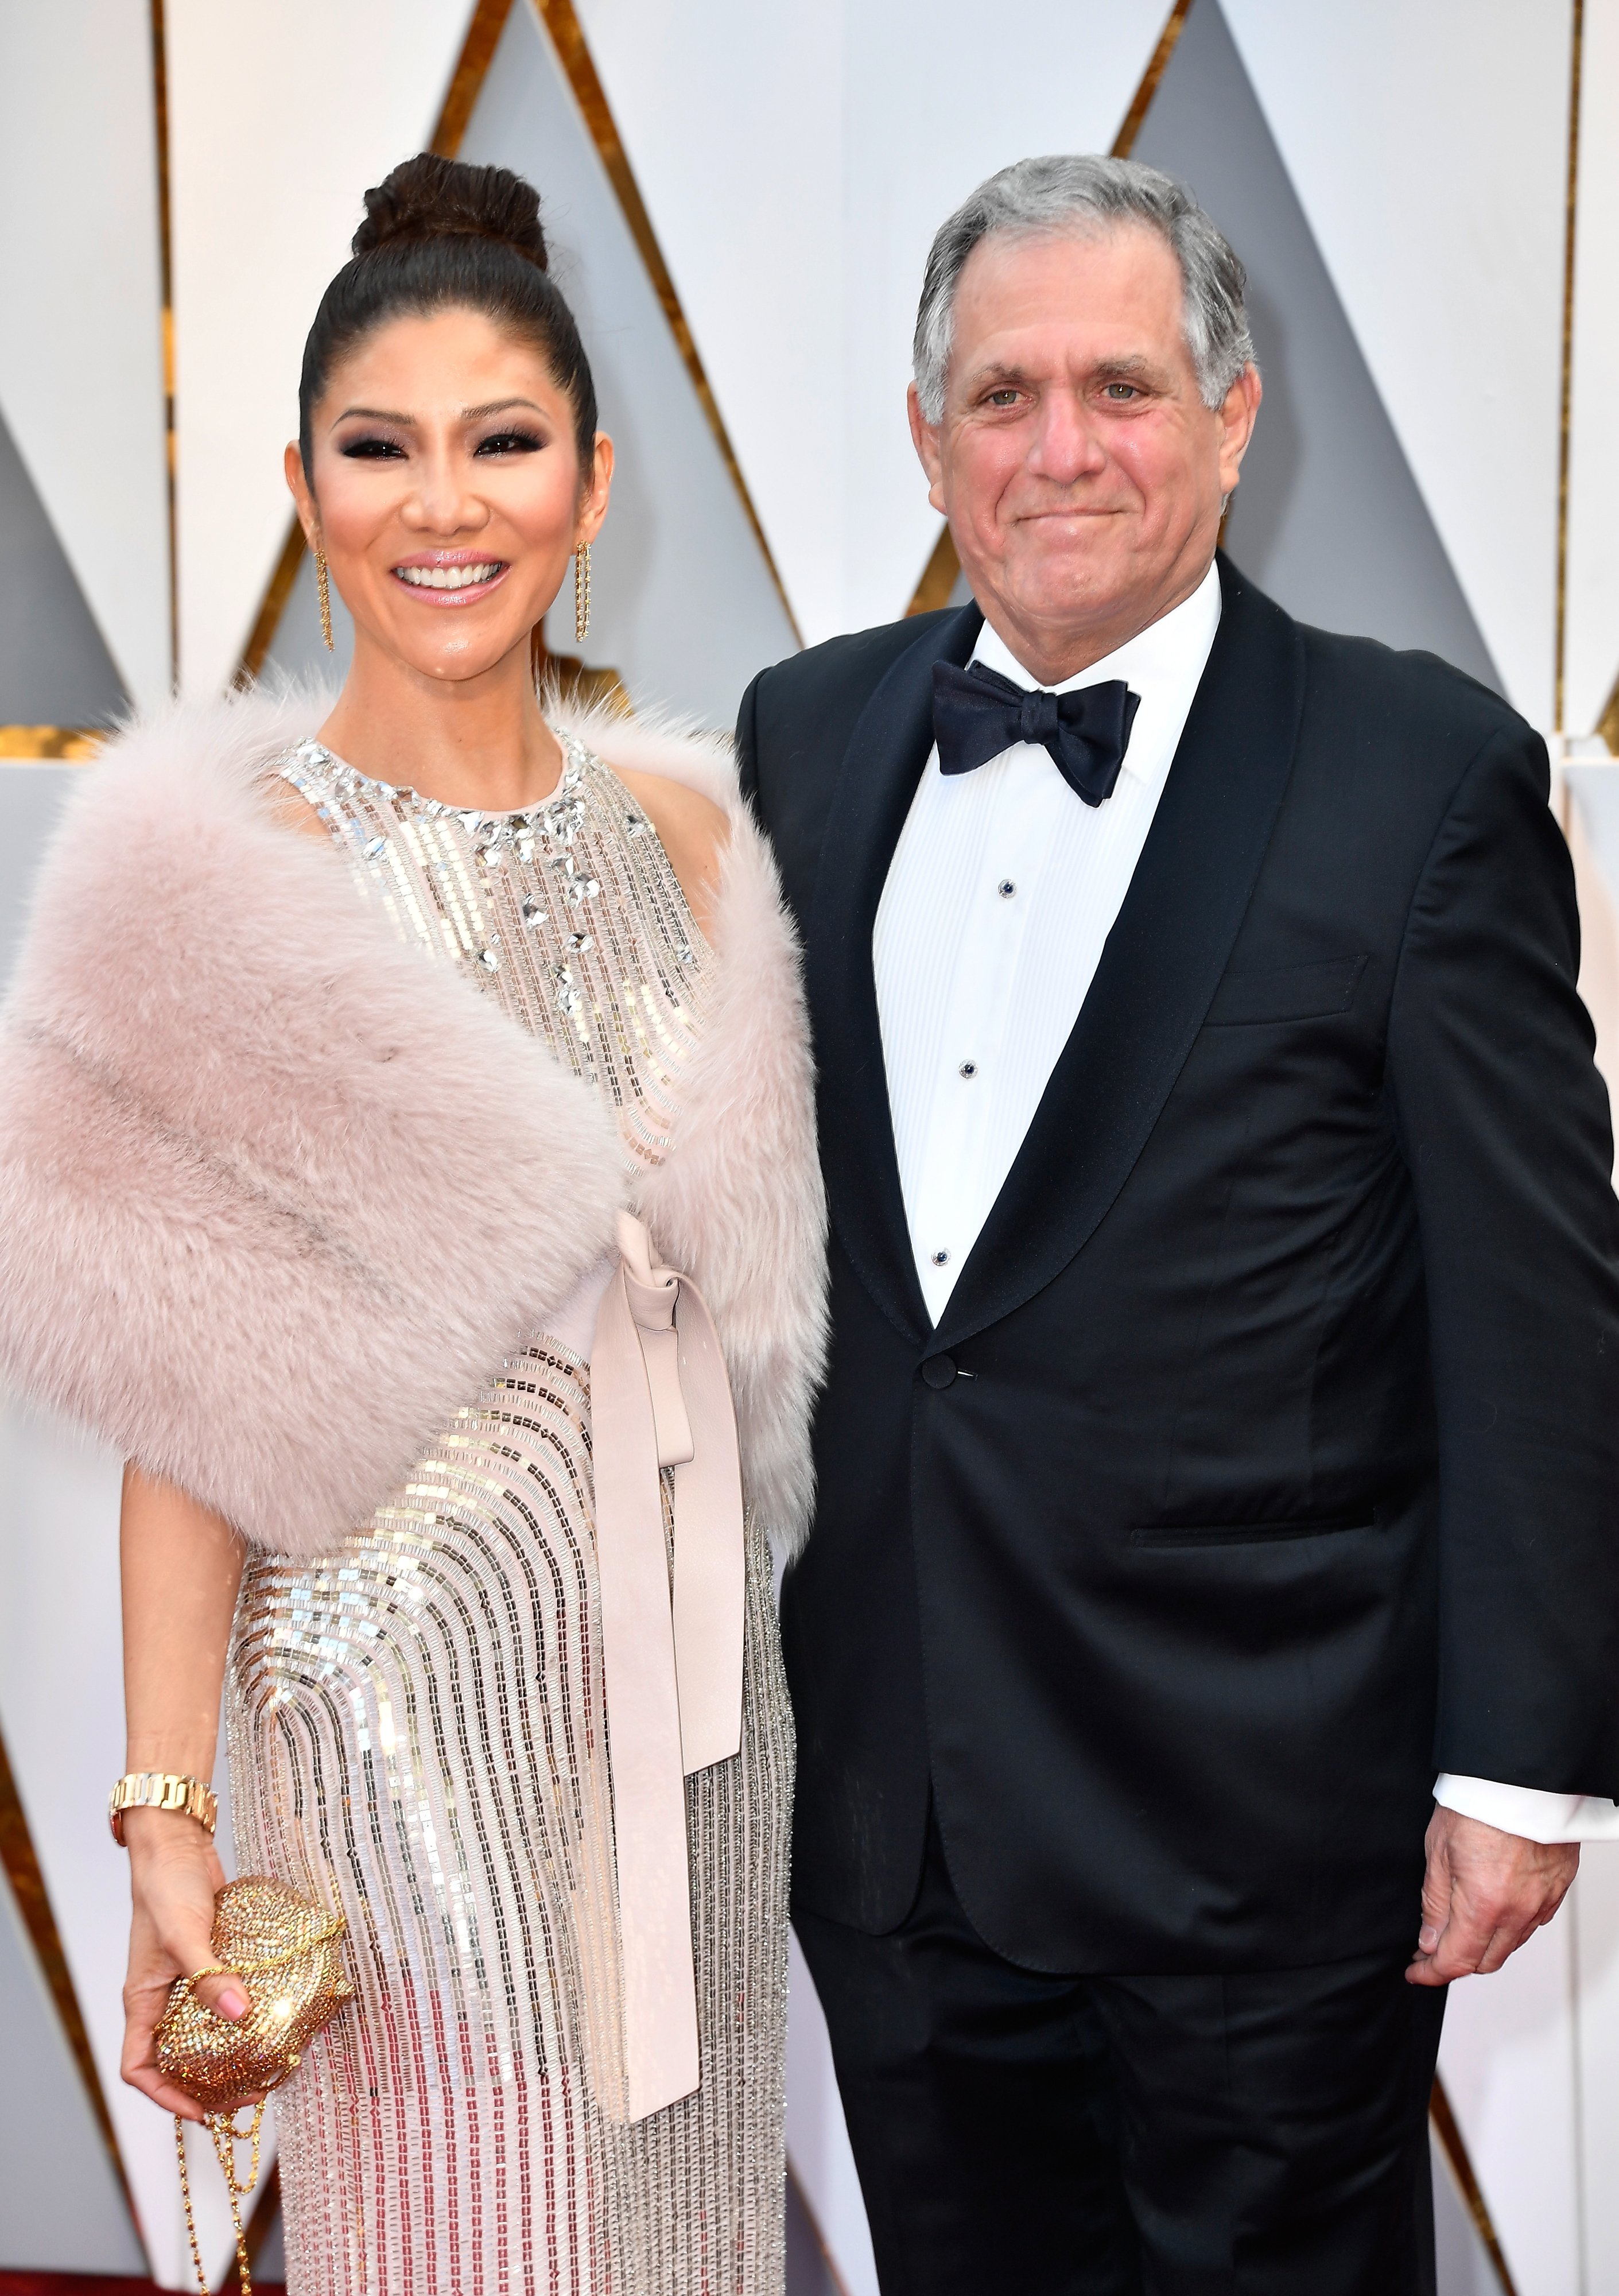 Julie Chen and Leslie Moonves attend the 89th Annual Academy Awards on February 26, 2017, in Hollywood, California | Source: Getty Images